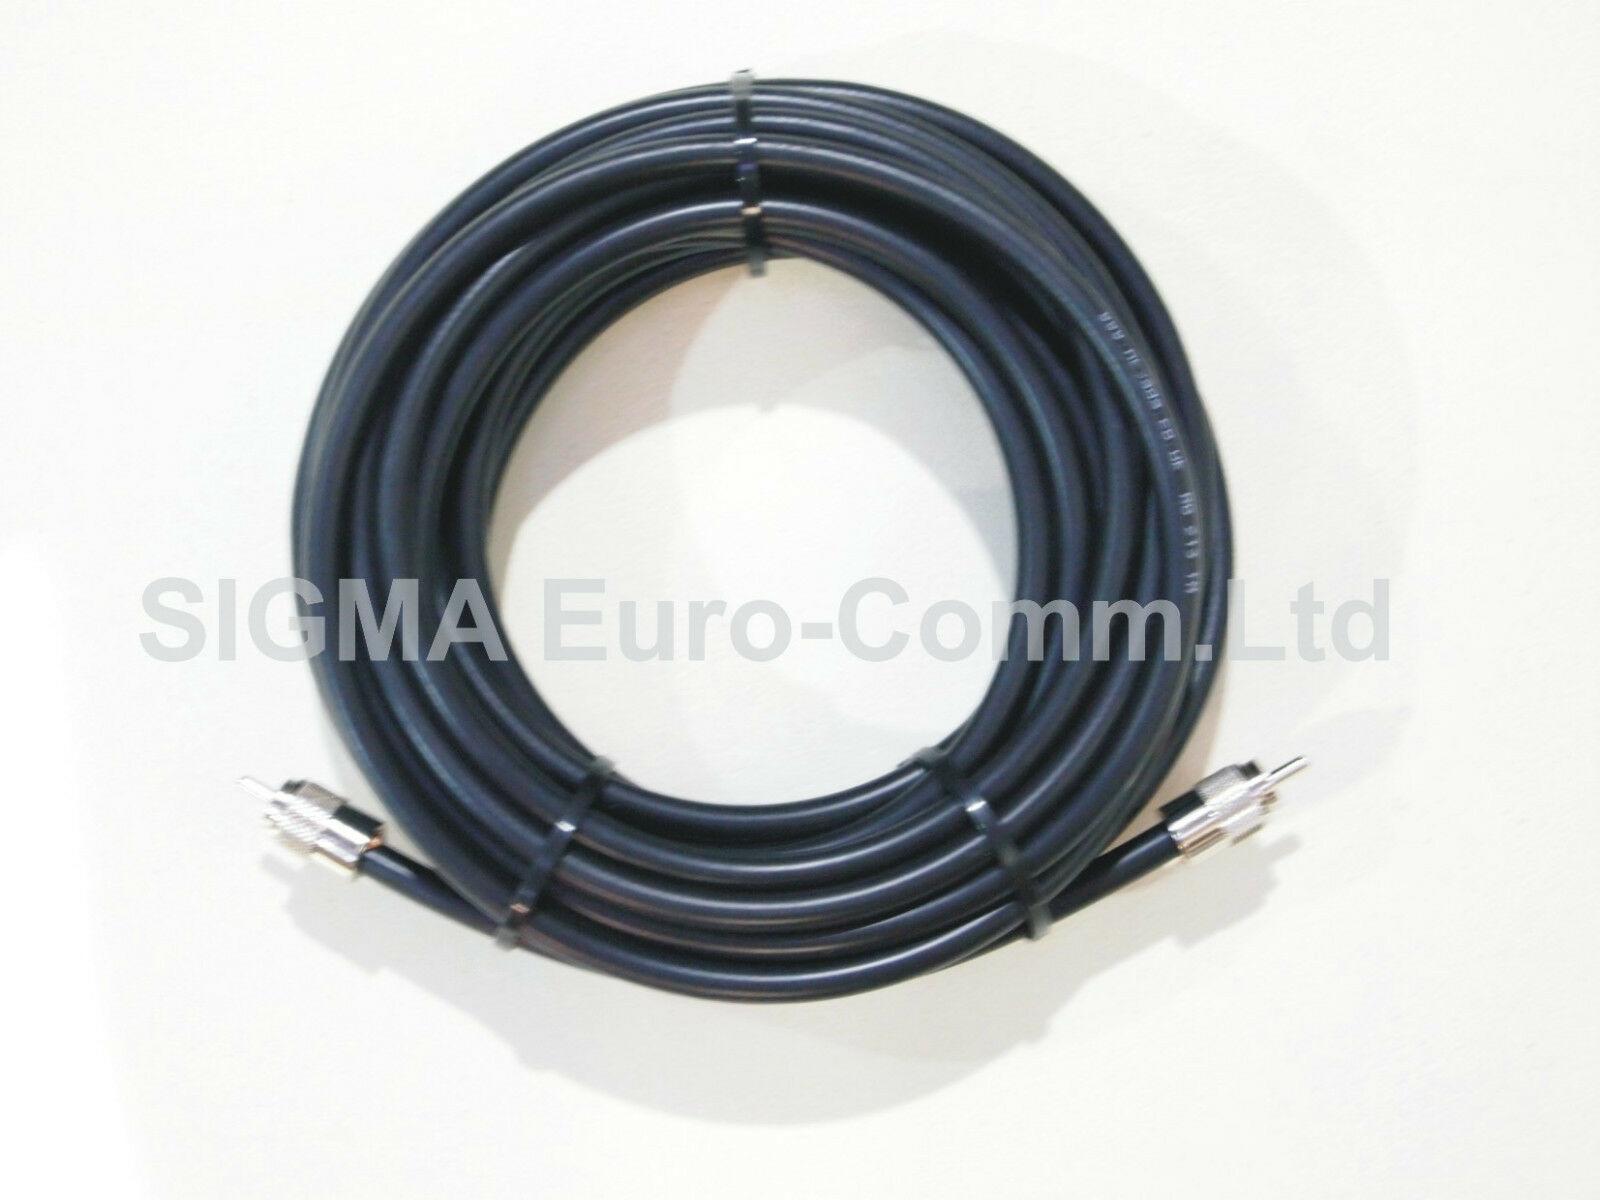 Sigma RG213 Low Loss 50 Ohm Coaxial Cable 5m Fitted With 2 x PL259 Male Connectors